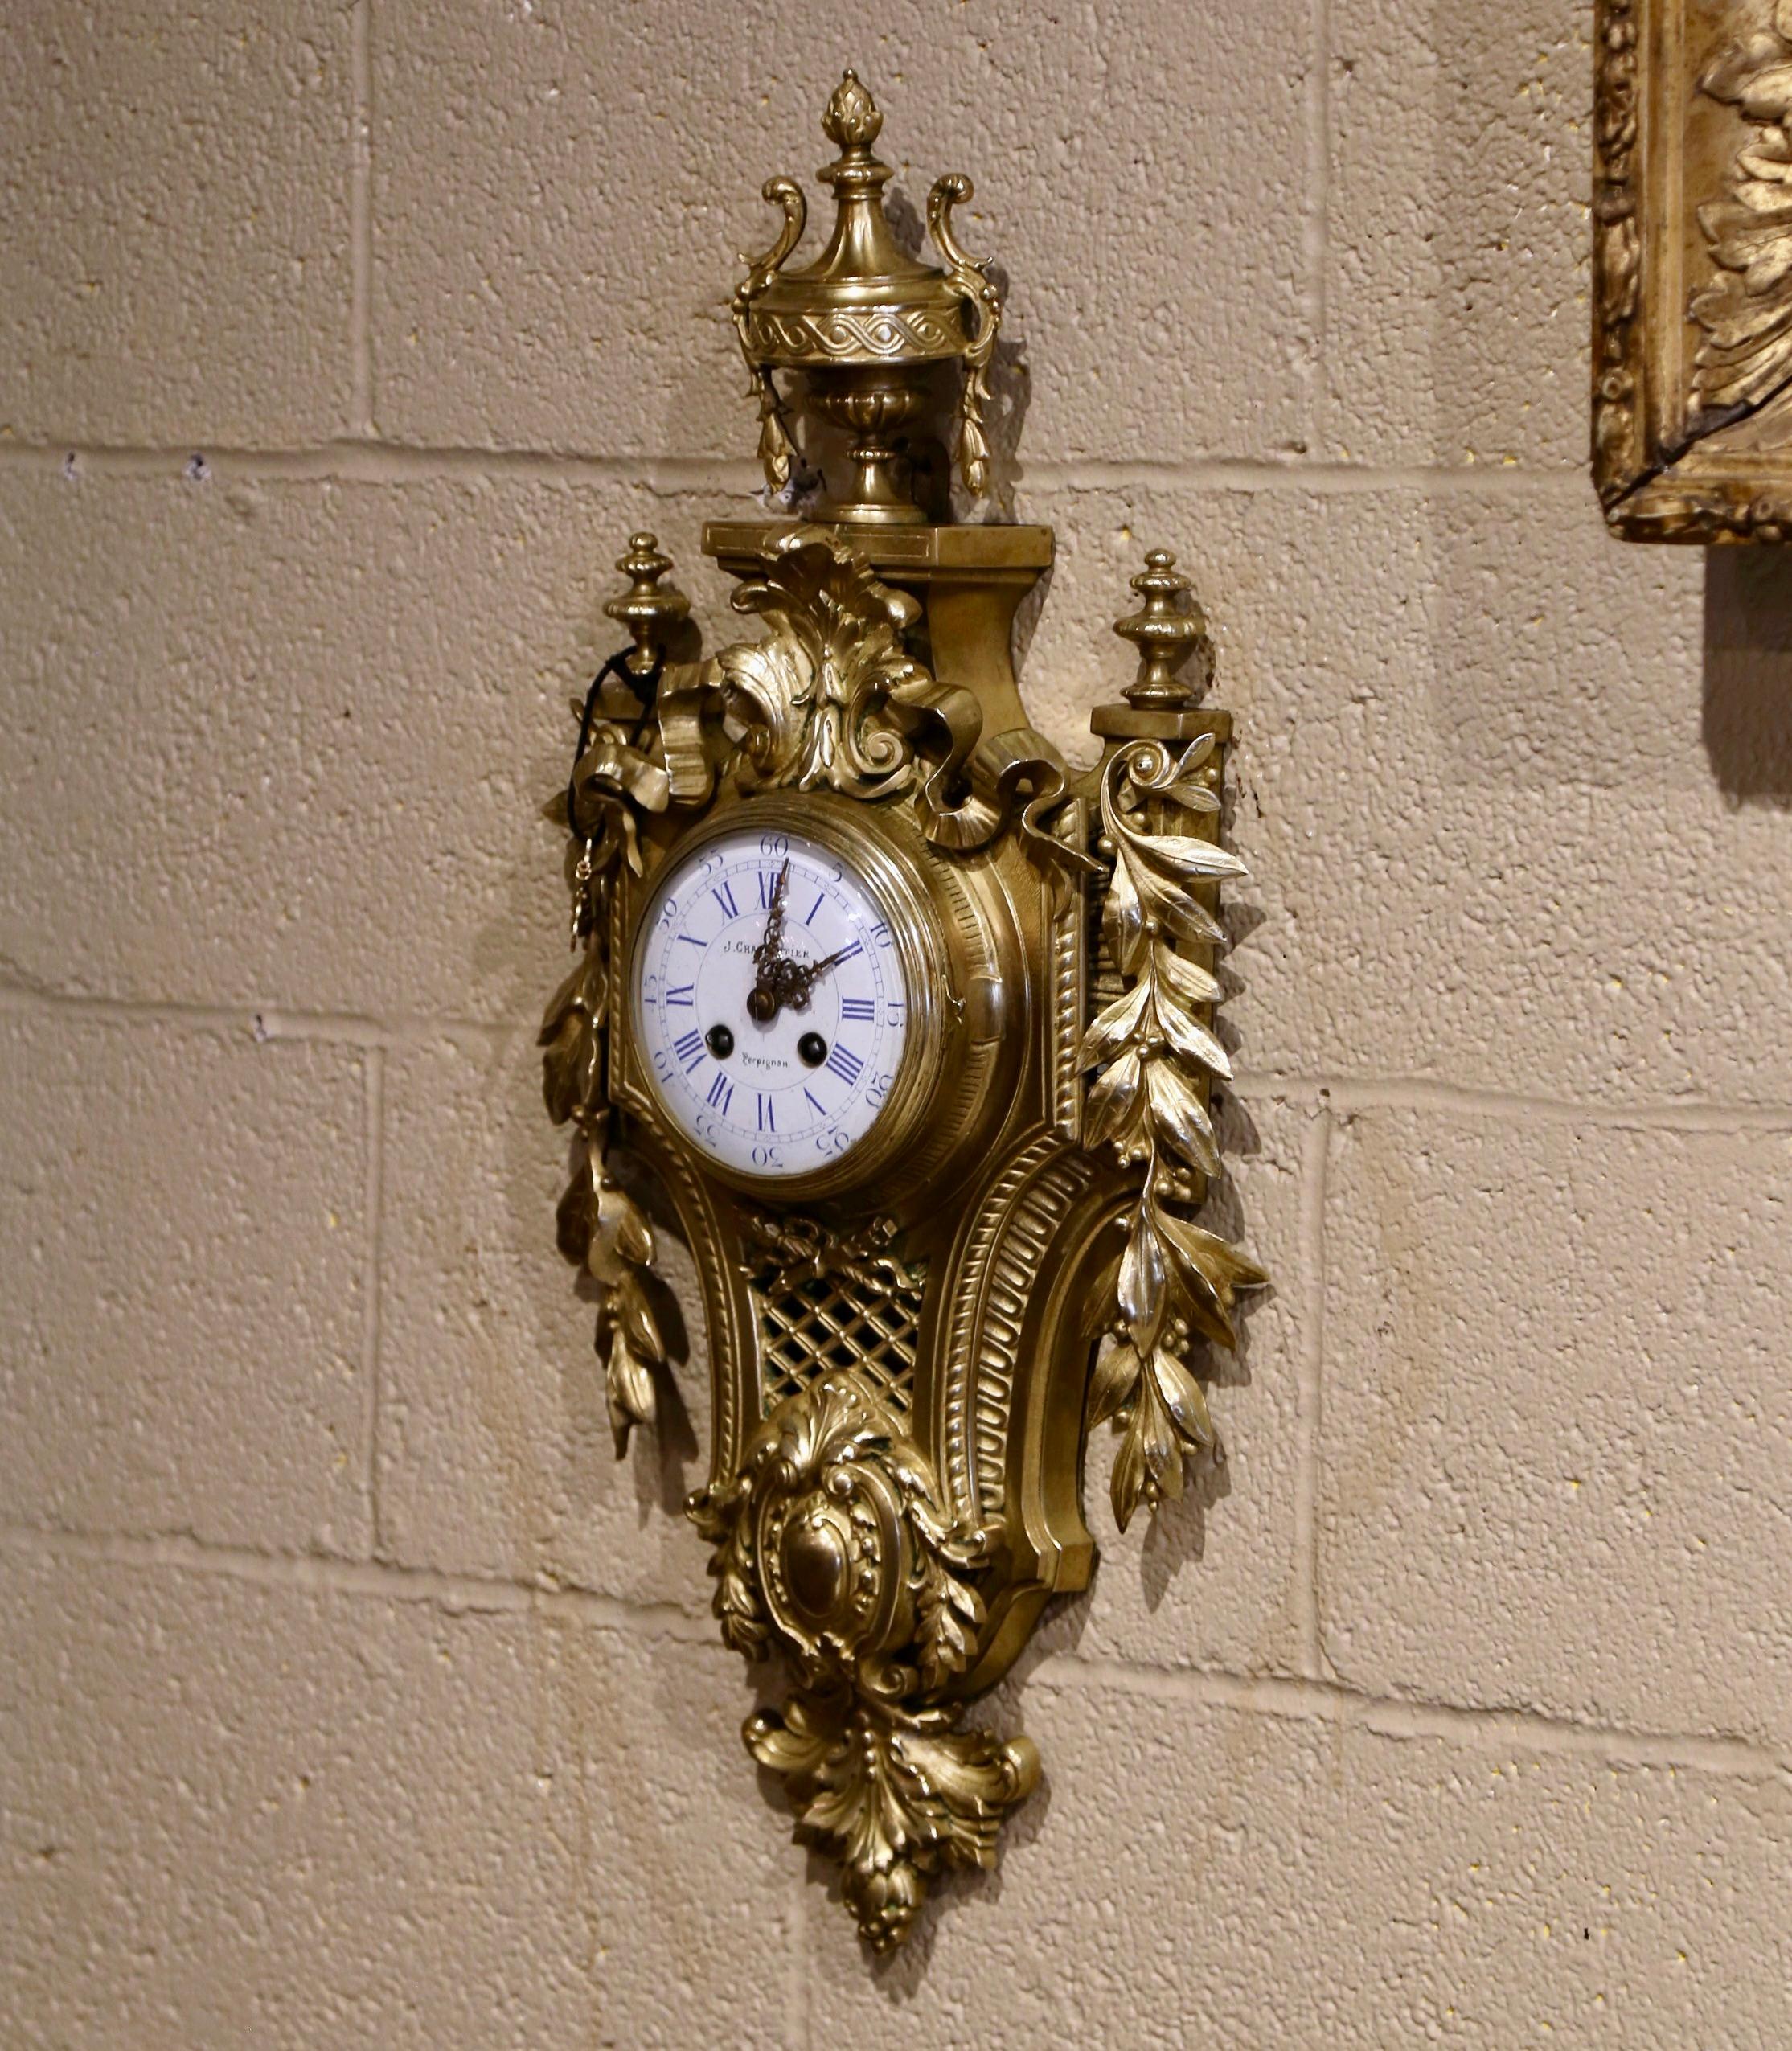 Crafted in Perpignan, southwest France, circa 1870, the wall clock made of bronze, features intricate decor in high relief. The pediment has a classic urn shape and the sides are decorated with laurel leaves. The porcelain dial, signed Charpentier,